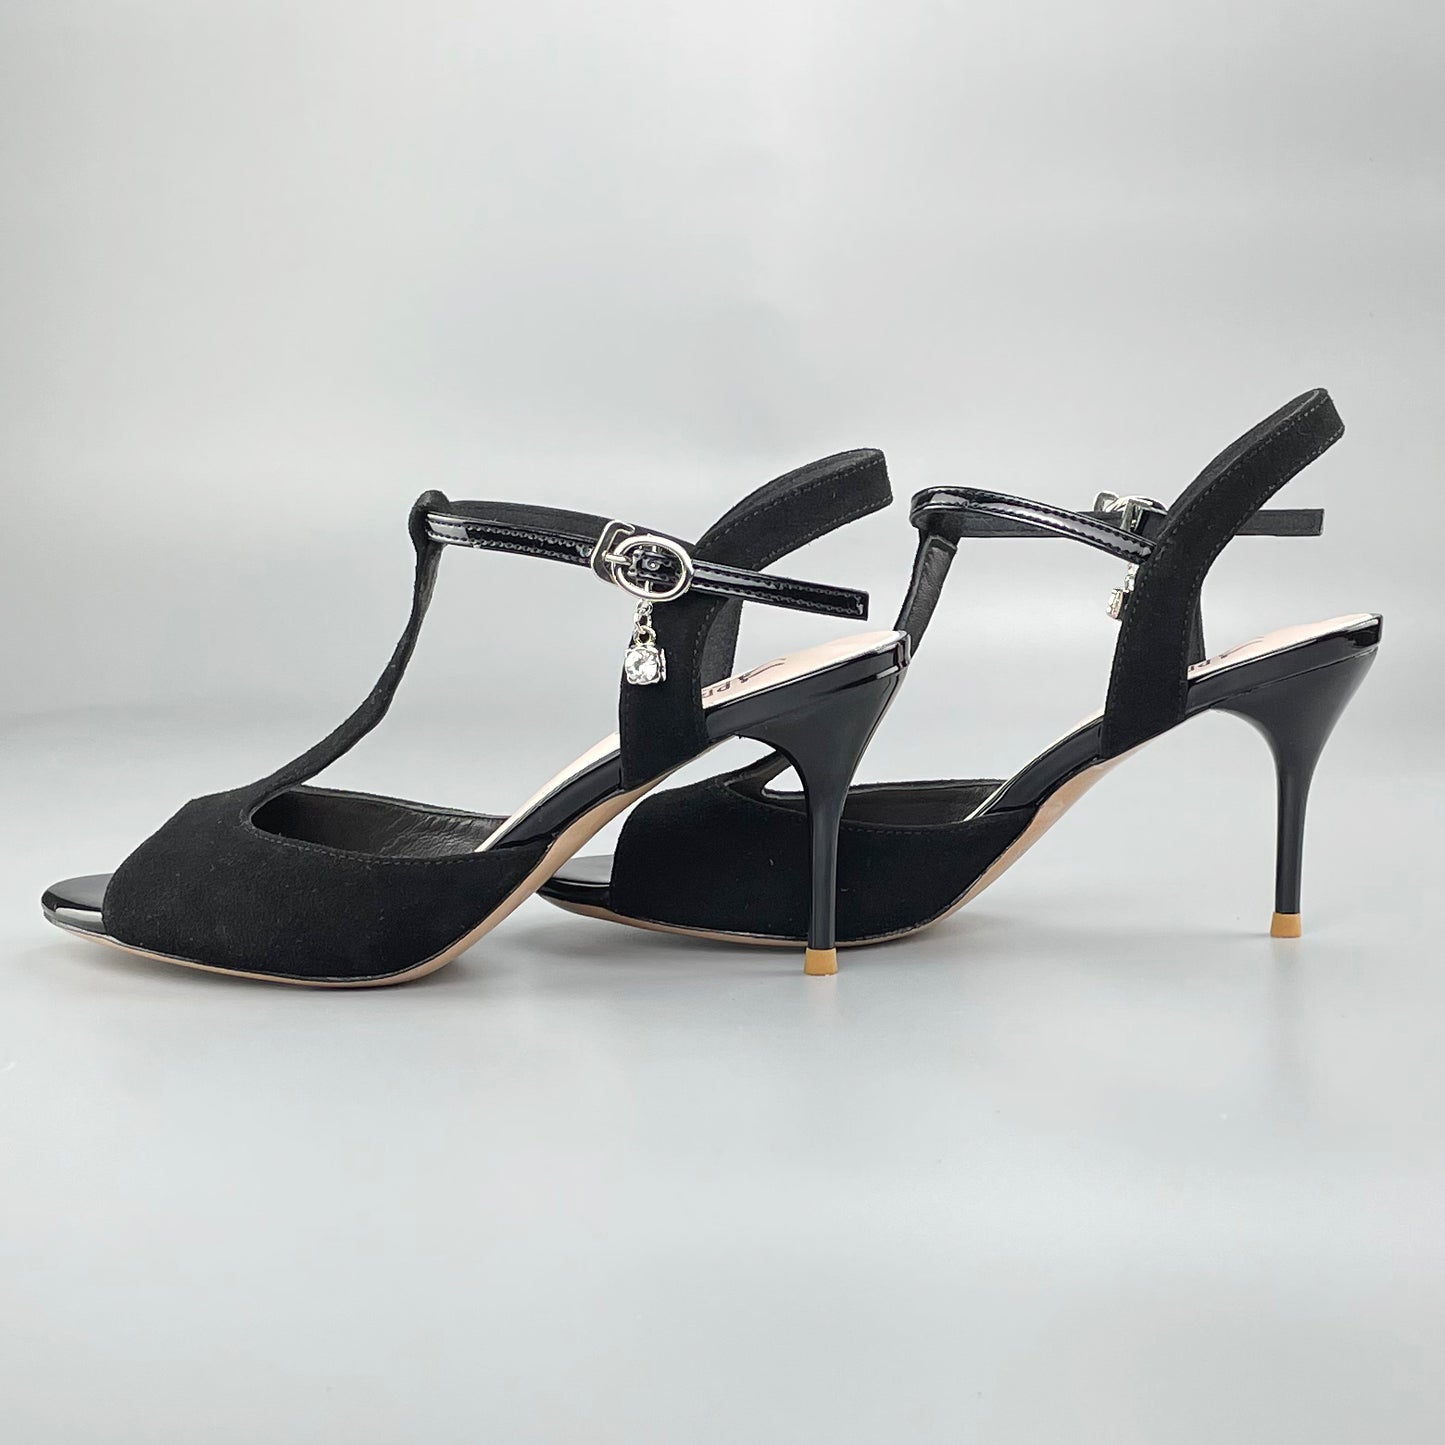 Pro Dancer Open-toe and Open-back Argentine Tango Shoes High Salsa Heels Hard Leather Sole Sandals Black (PD-9046A)